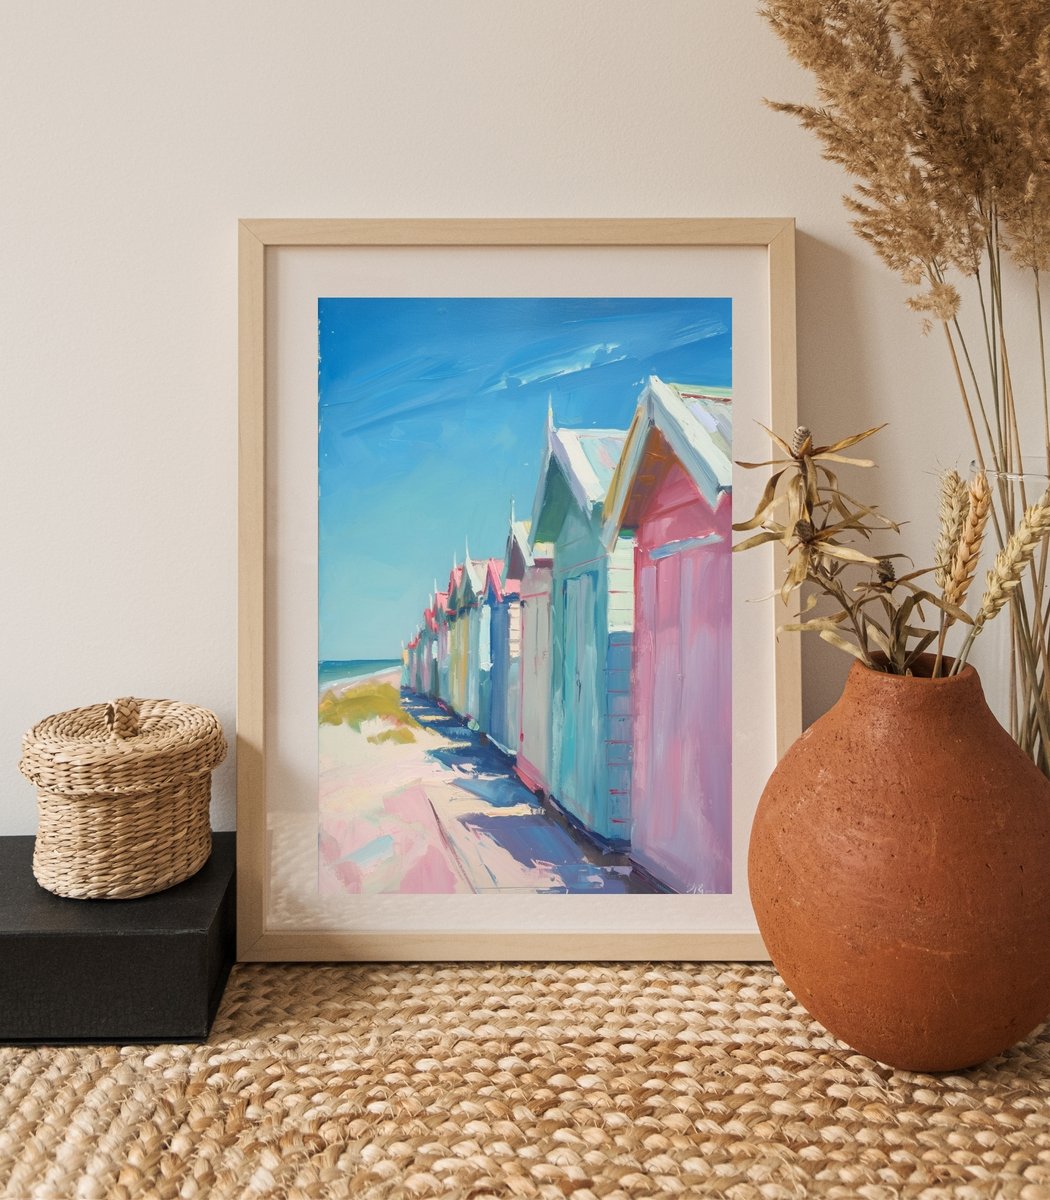 Seaside serenity in vibrant colors! 🌈🏖️ Lena Art Design's print brings the charm of beach huts and sandy shores to your home. #BeachVibes #ColorfulArt #LenaArtDesign